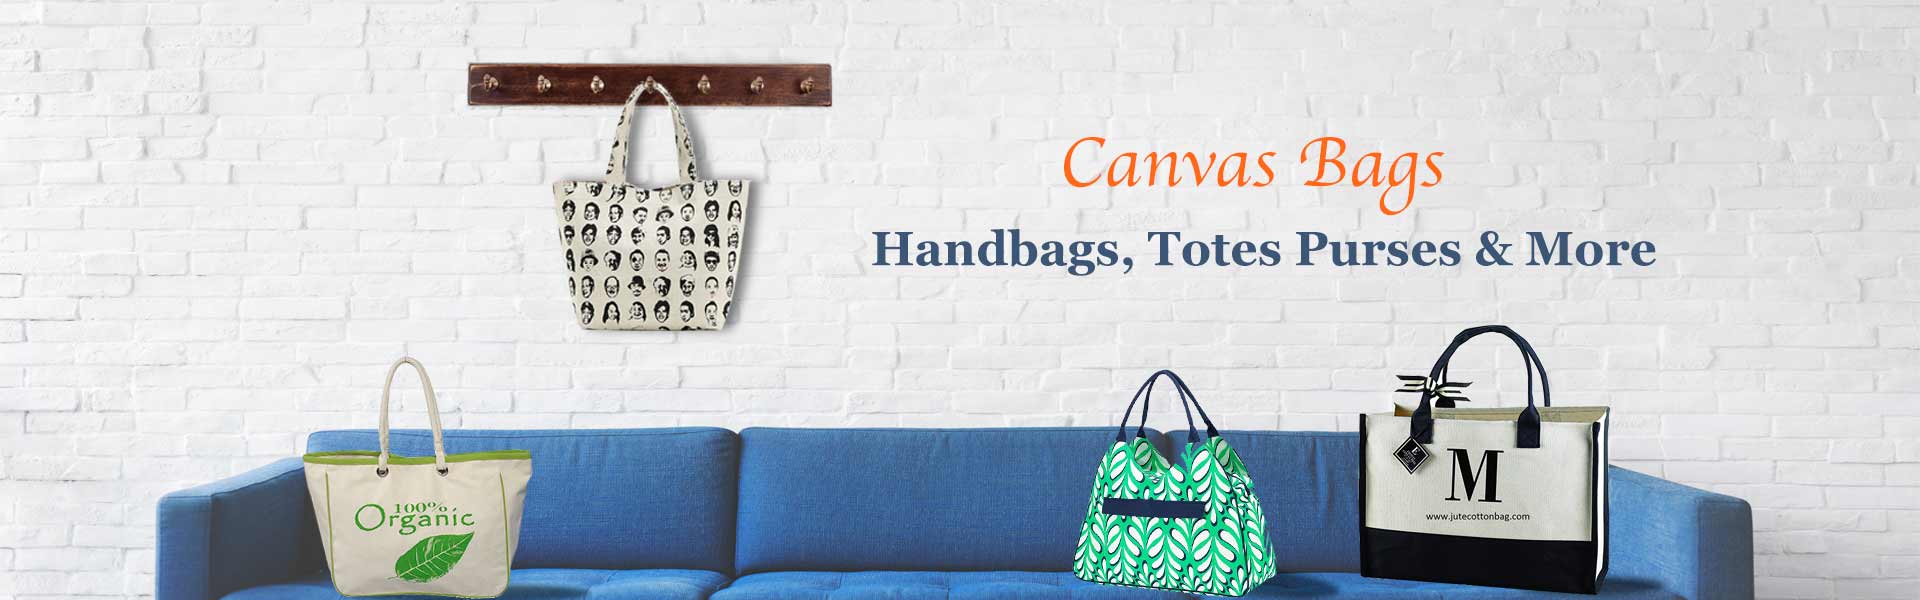 Wholesale Canvas Bags Supplier in Hawaii